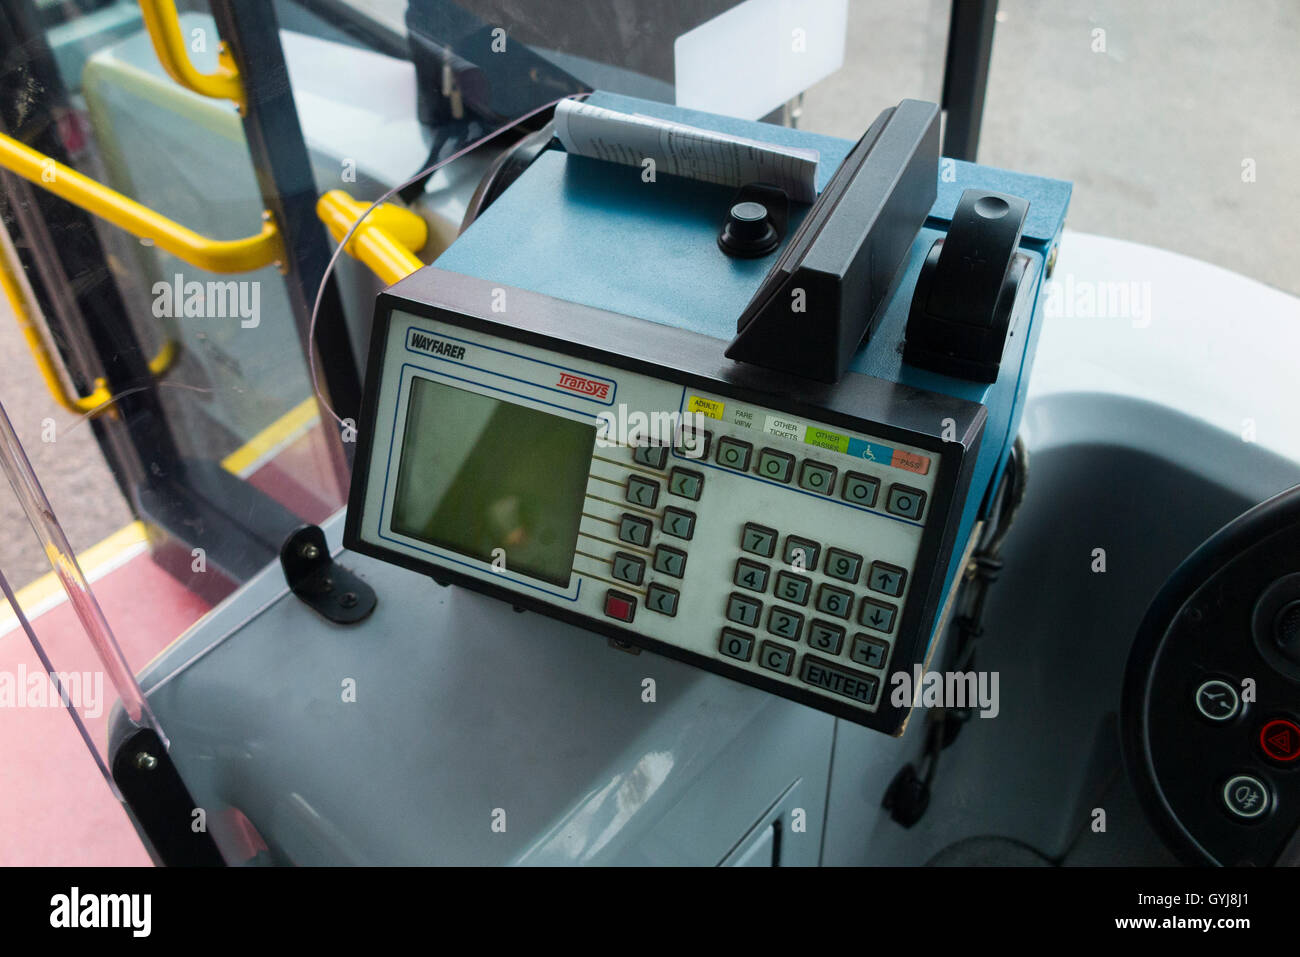 Wayfarer Transys early Oyster card reader / validator / validators & ticket machine seen from the driver's seat of a London bus. Stock Photo